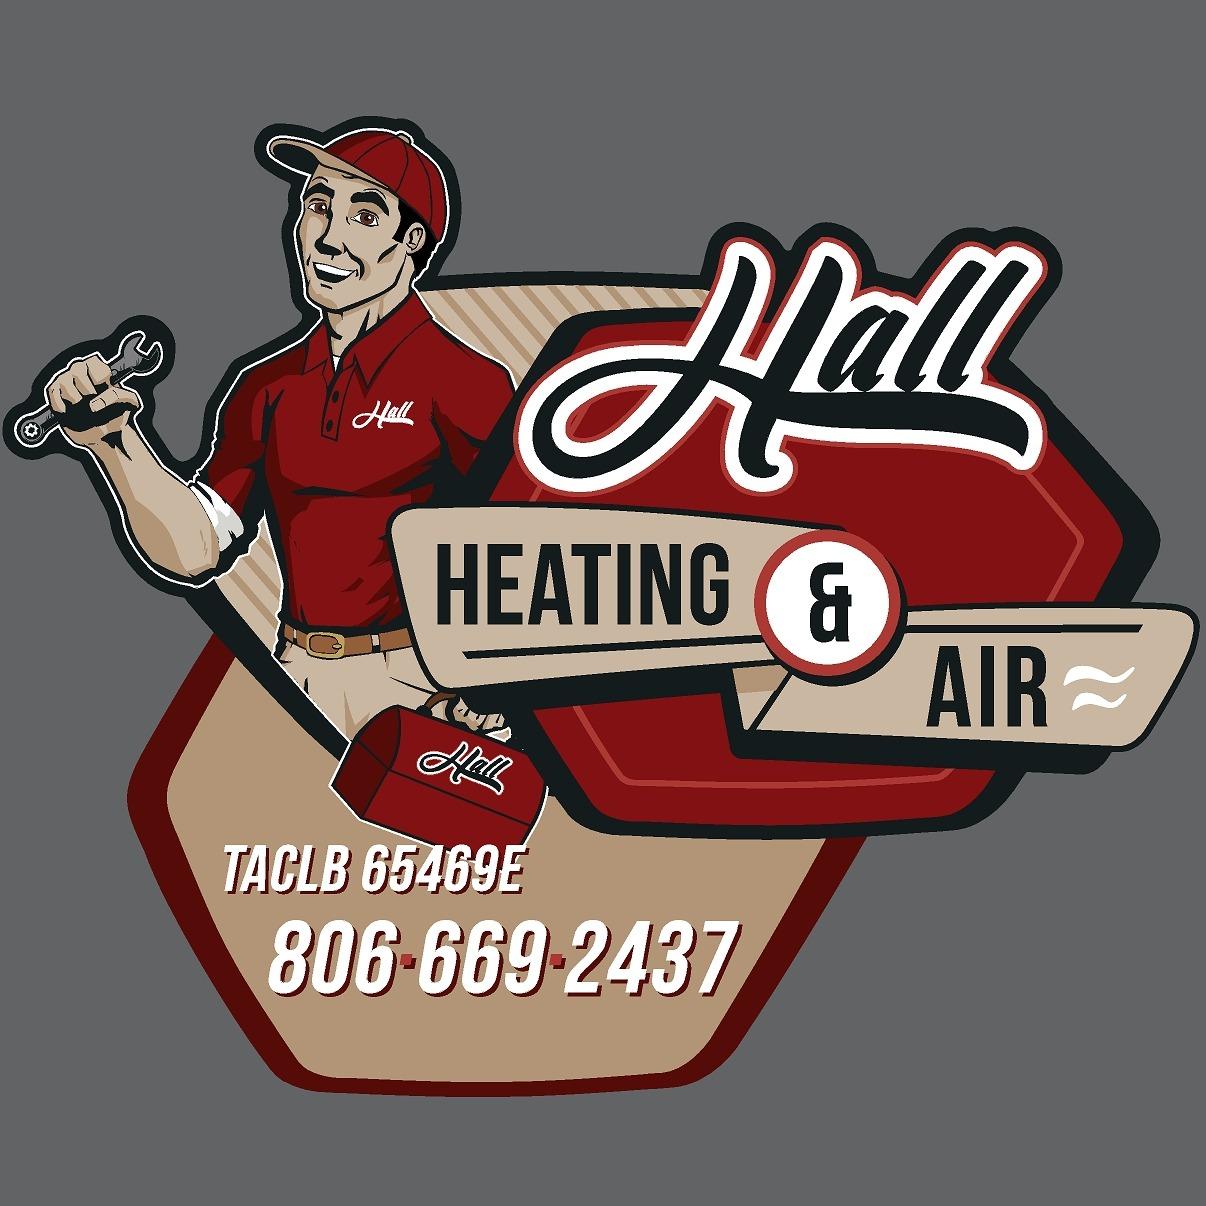 Hall Heating And Air - Pampa, TX 79065 - (806)669-2437 | ShowMeLocal.com